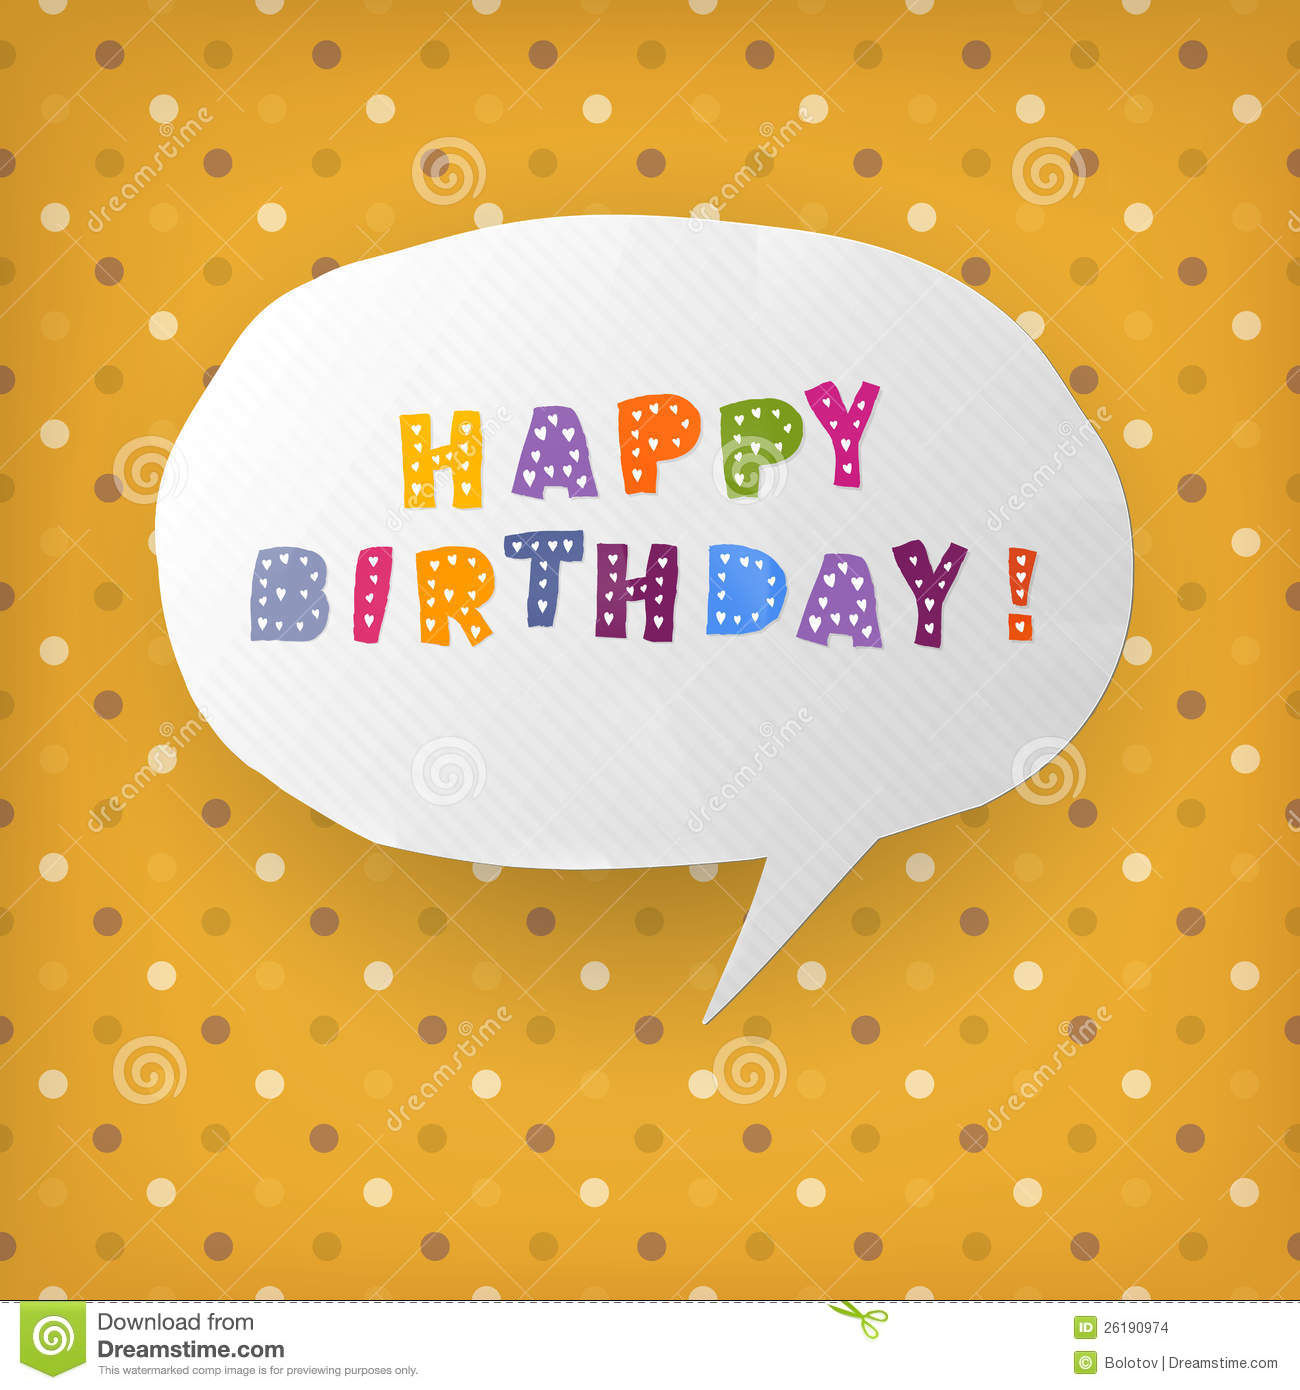 Happy Birthday Gift Card Template Stock Images   Image  26190974